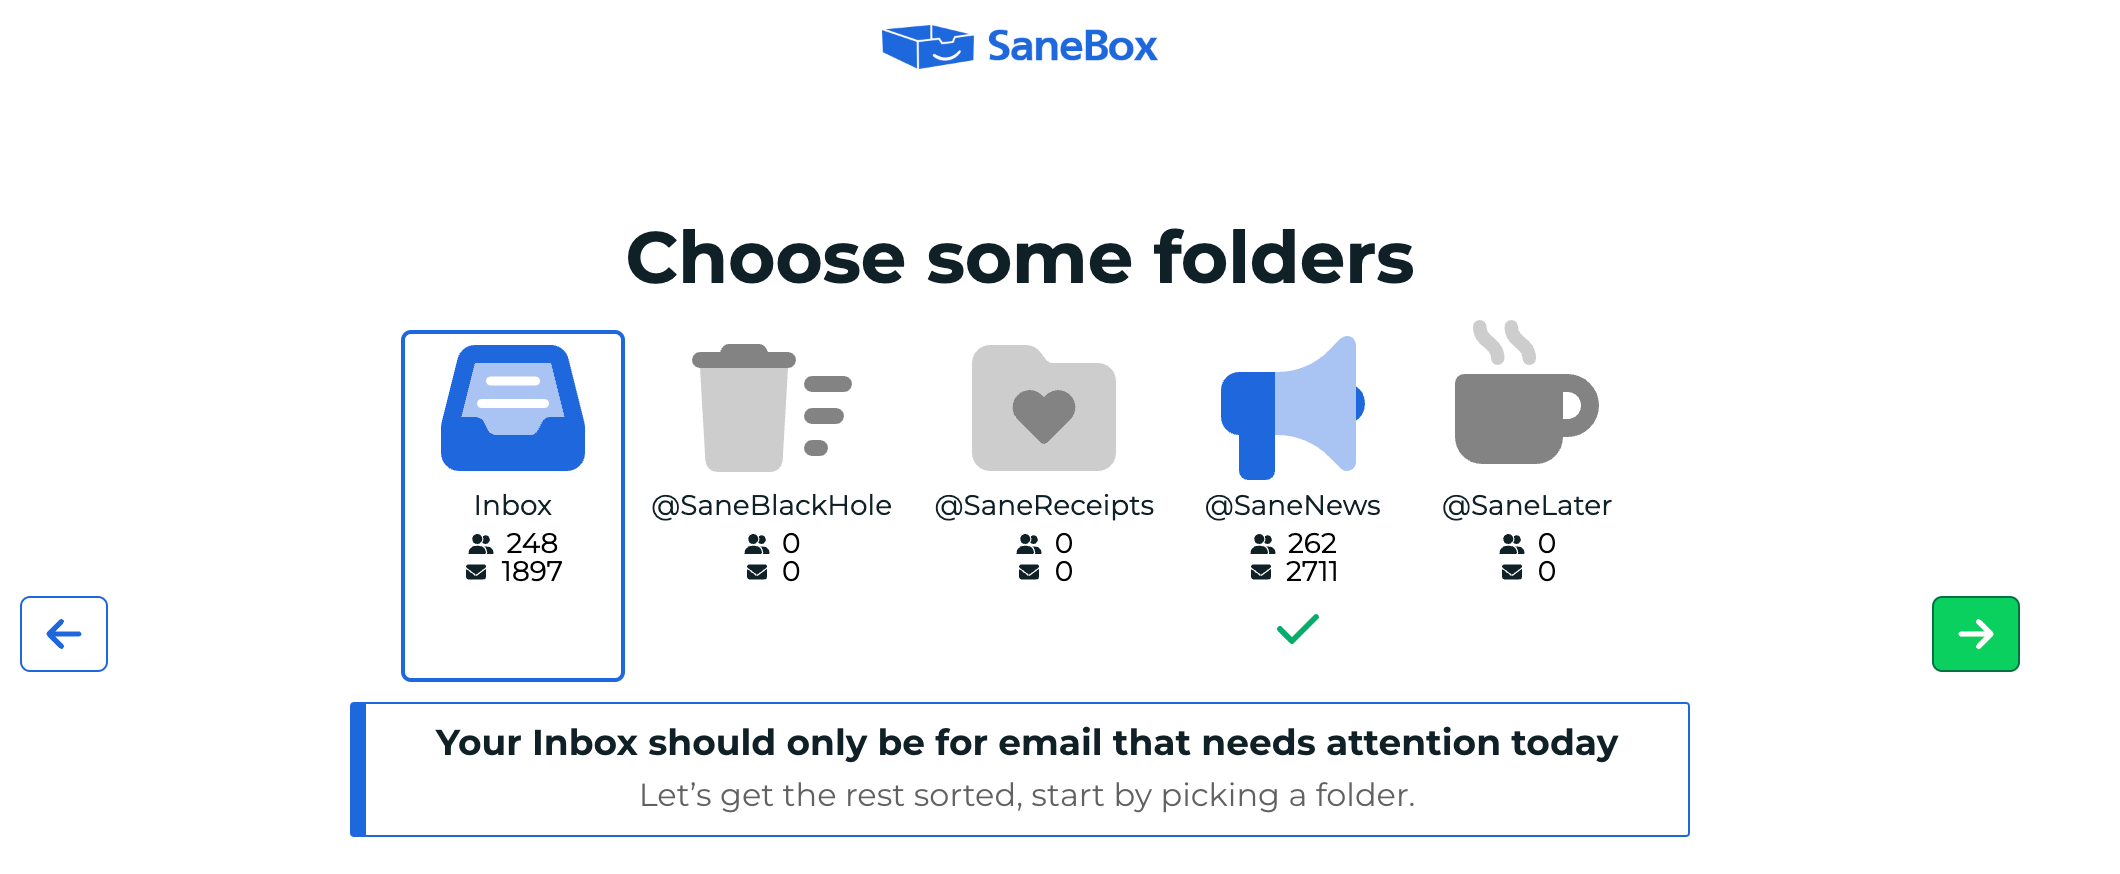 SaneBox folders help you focus on priority emails